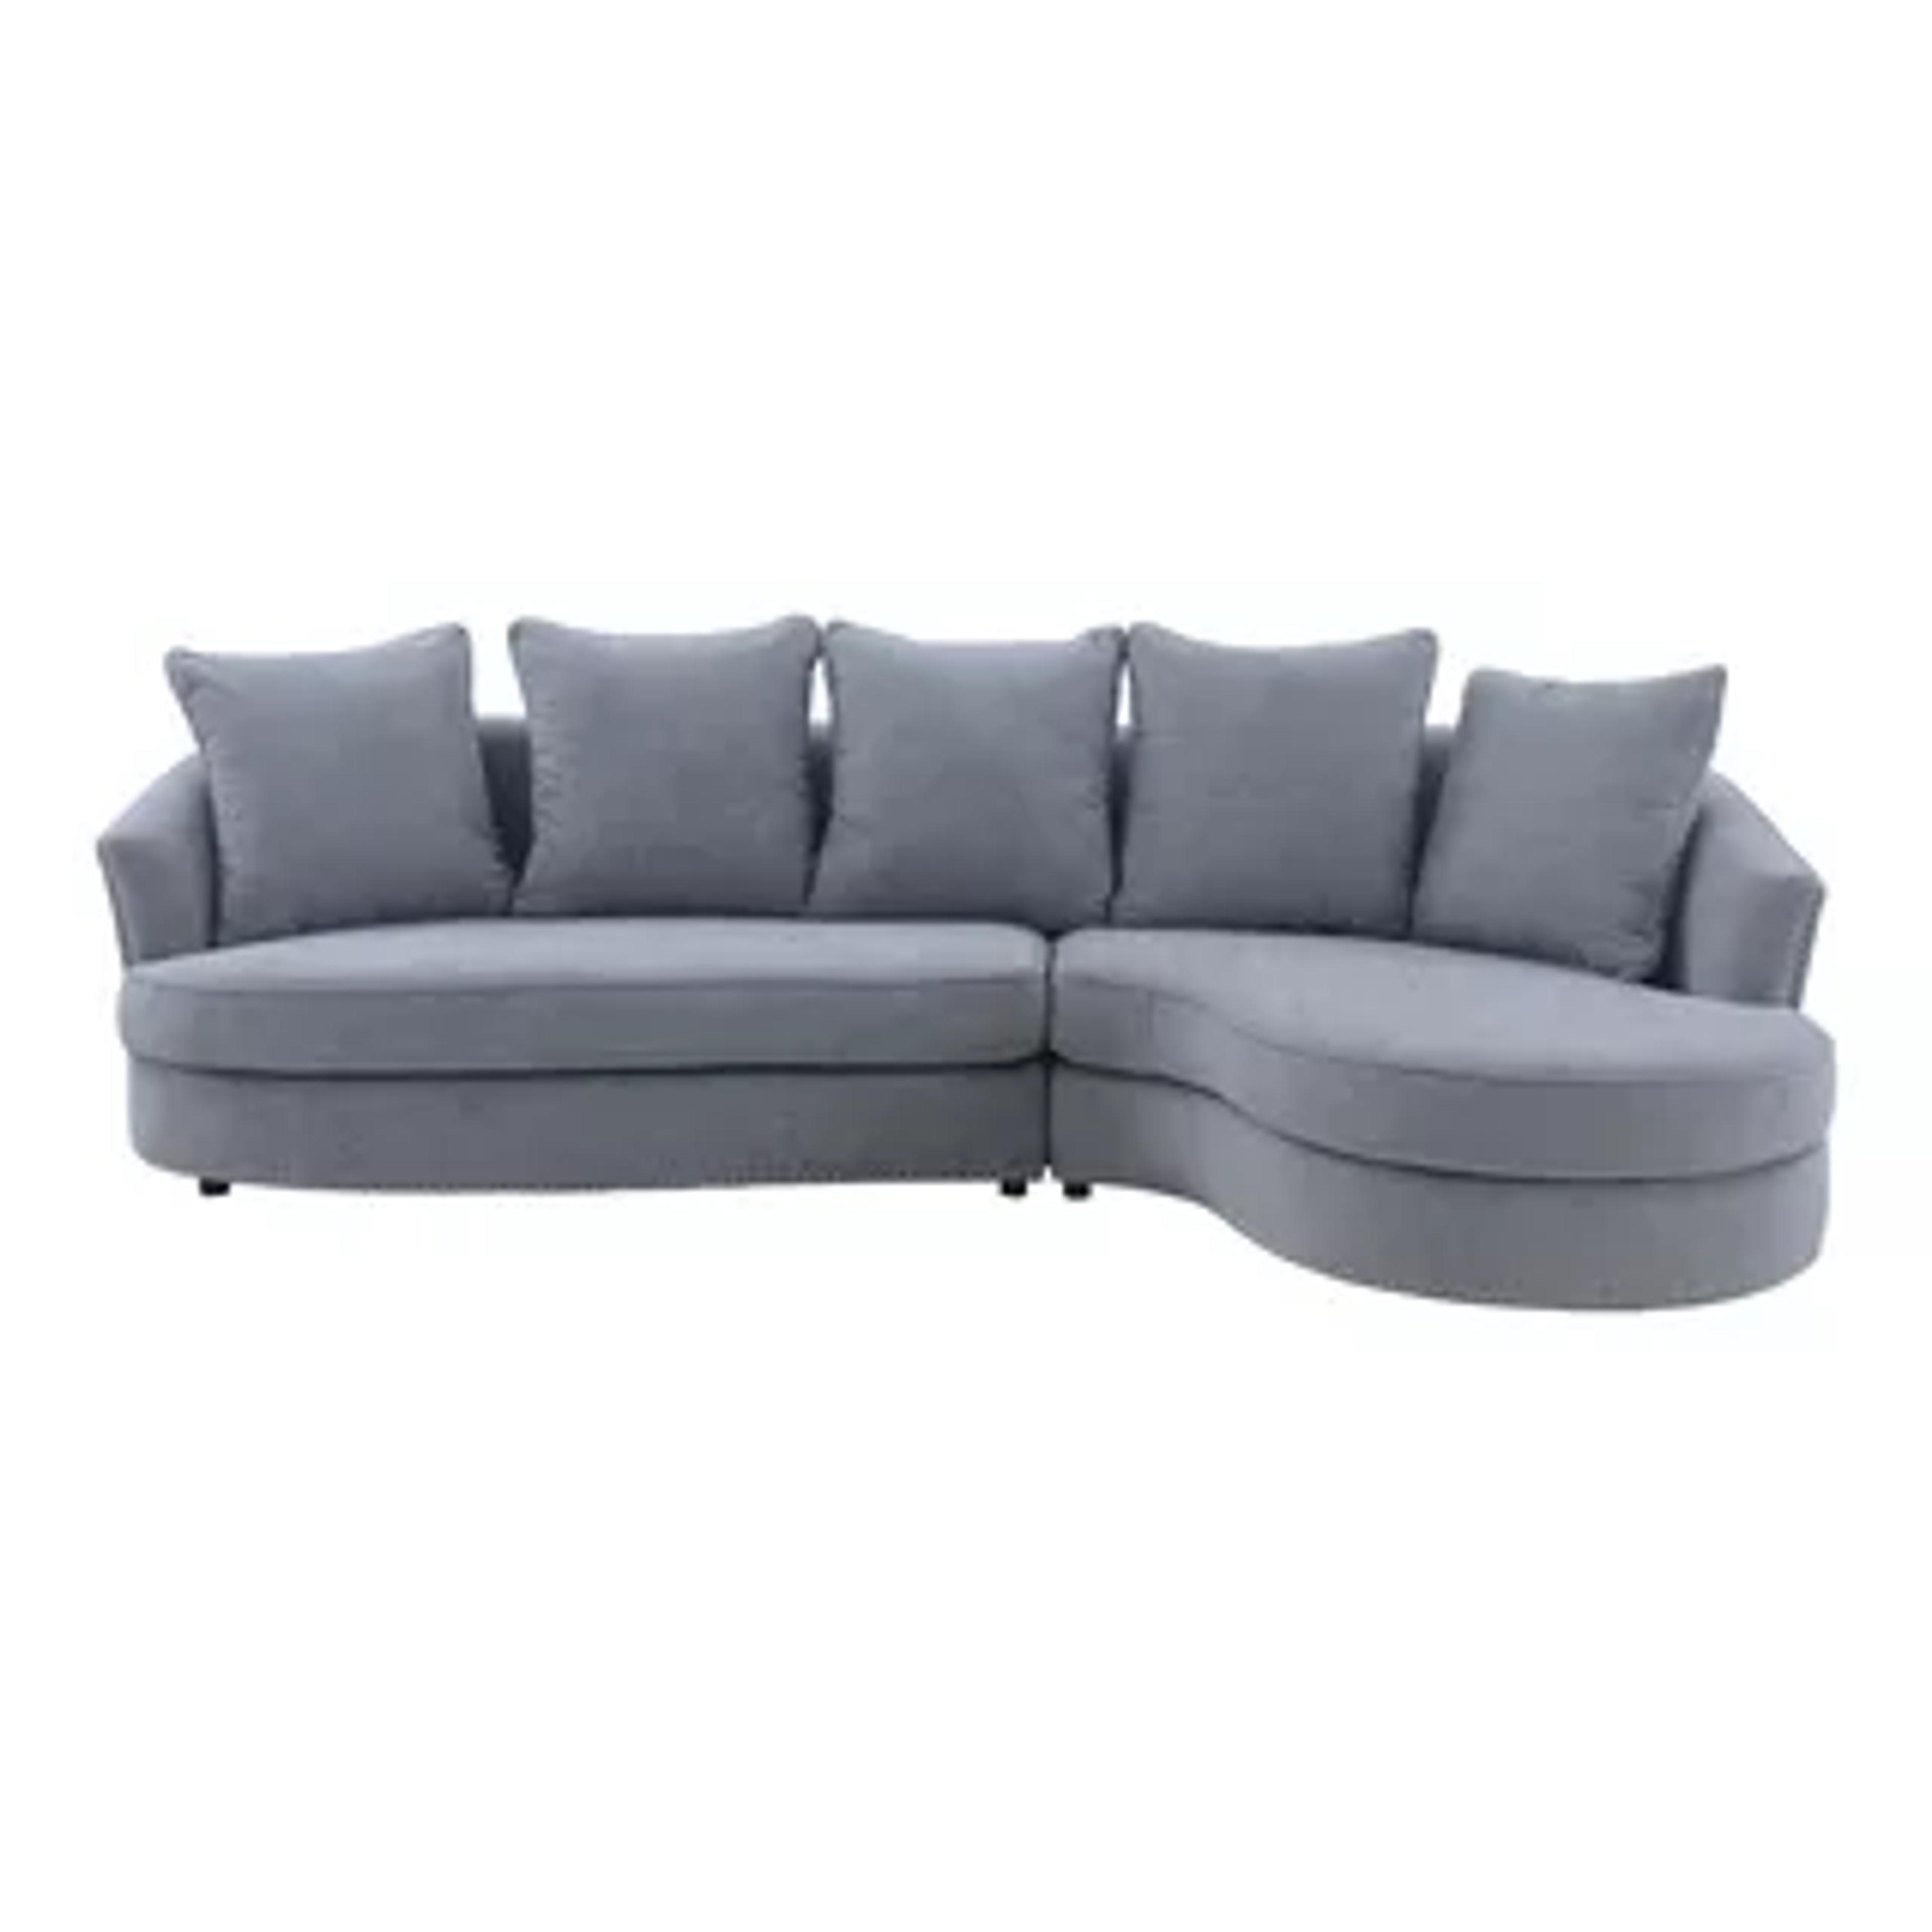 Queenly Gray Fabric Uphostered Corner Sofa - Transitional - Sectional Sofas - by HedgeApple